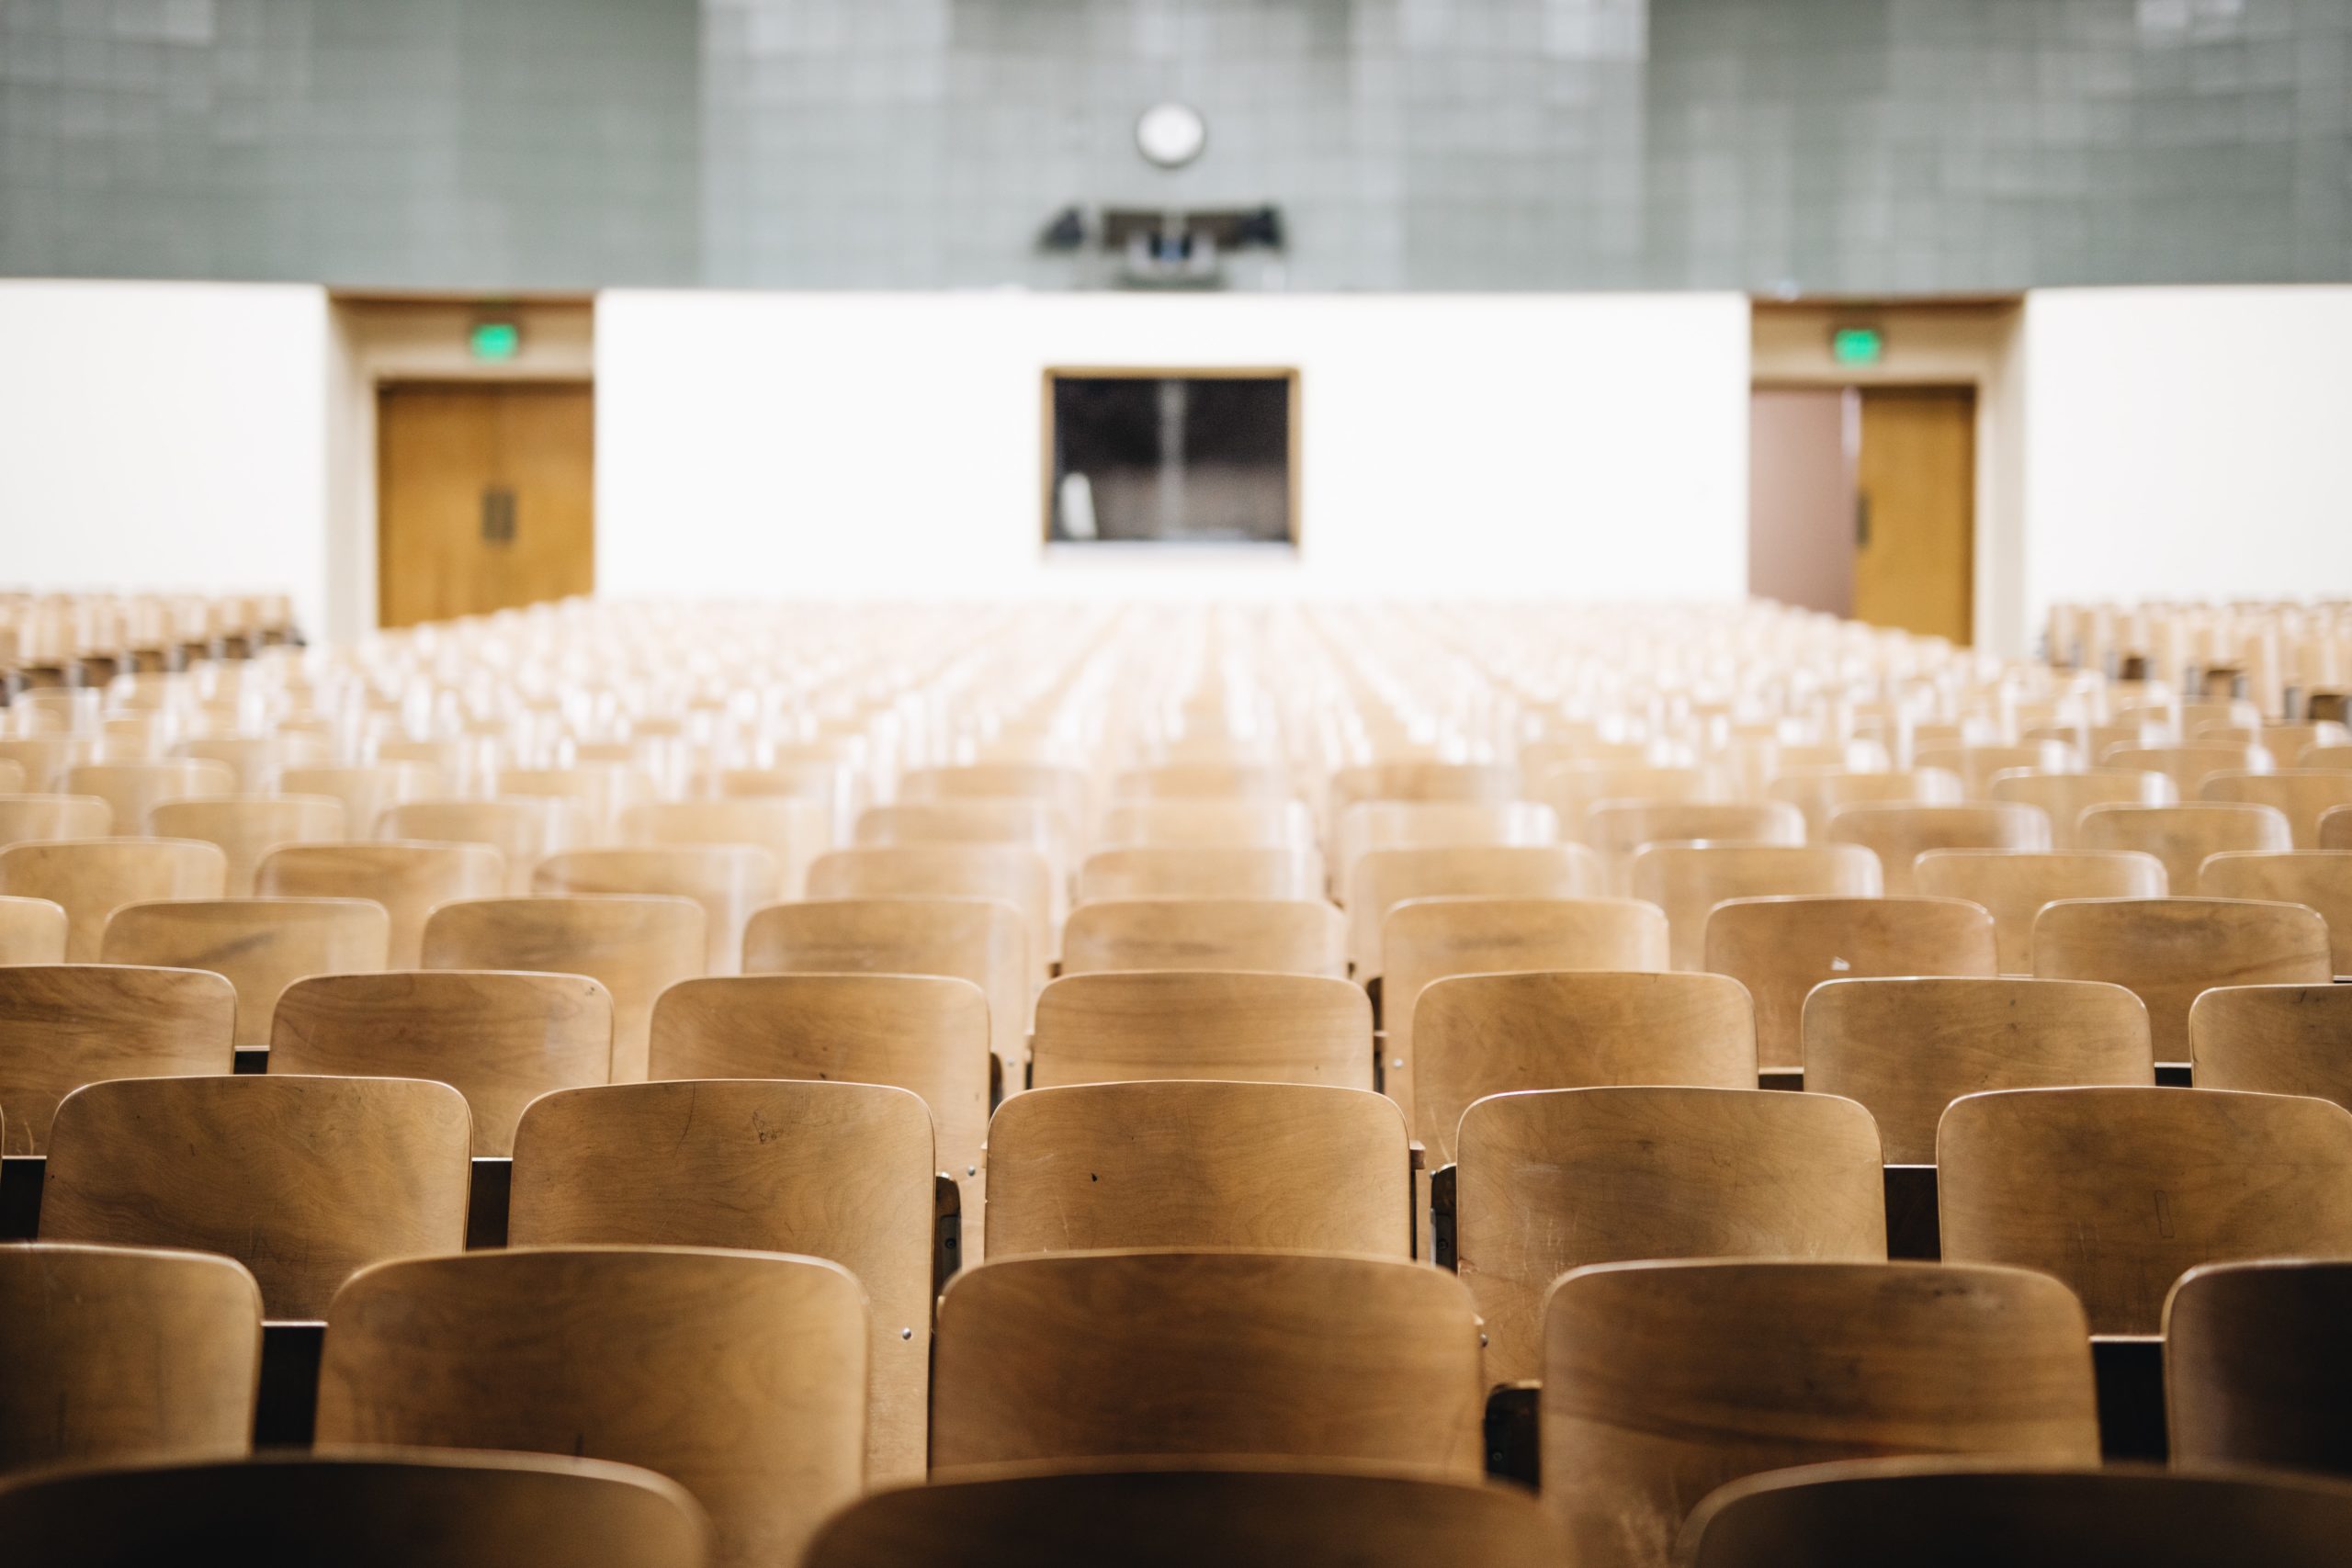 This image shows an empty lecture hall at a university.